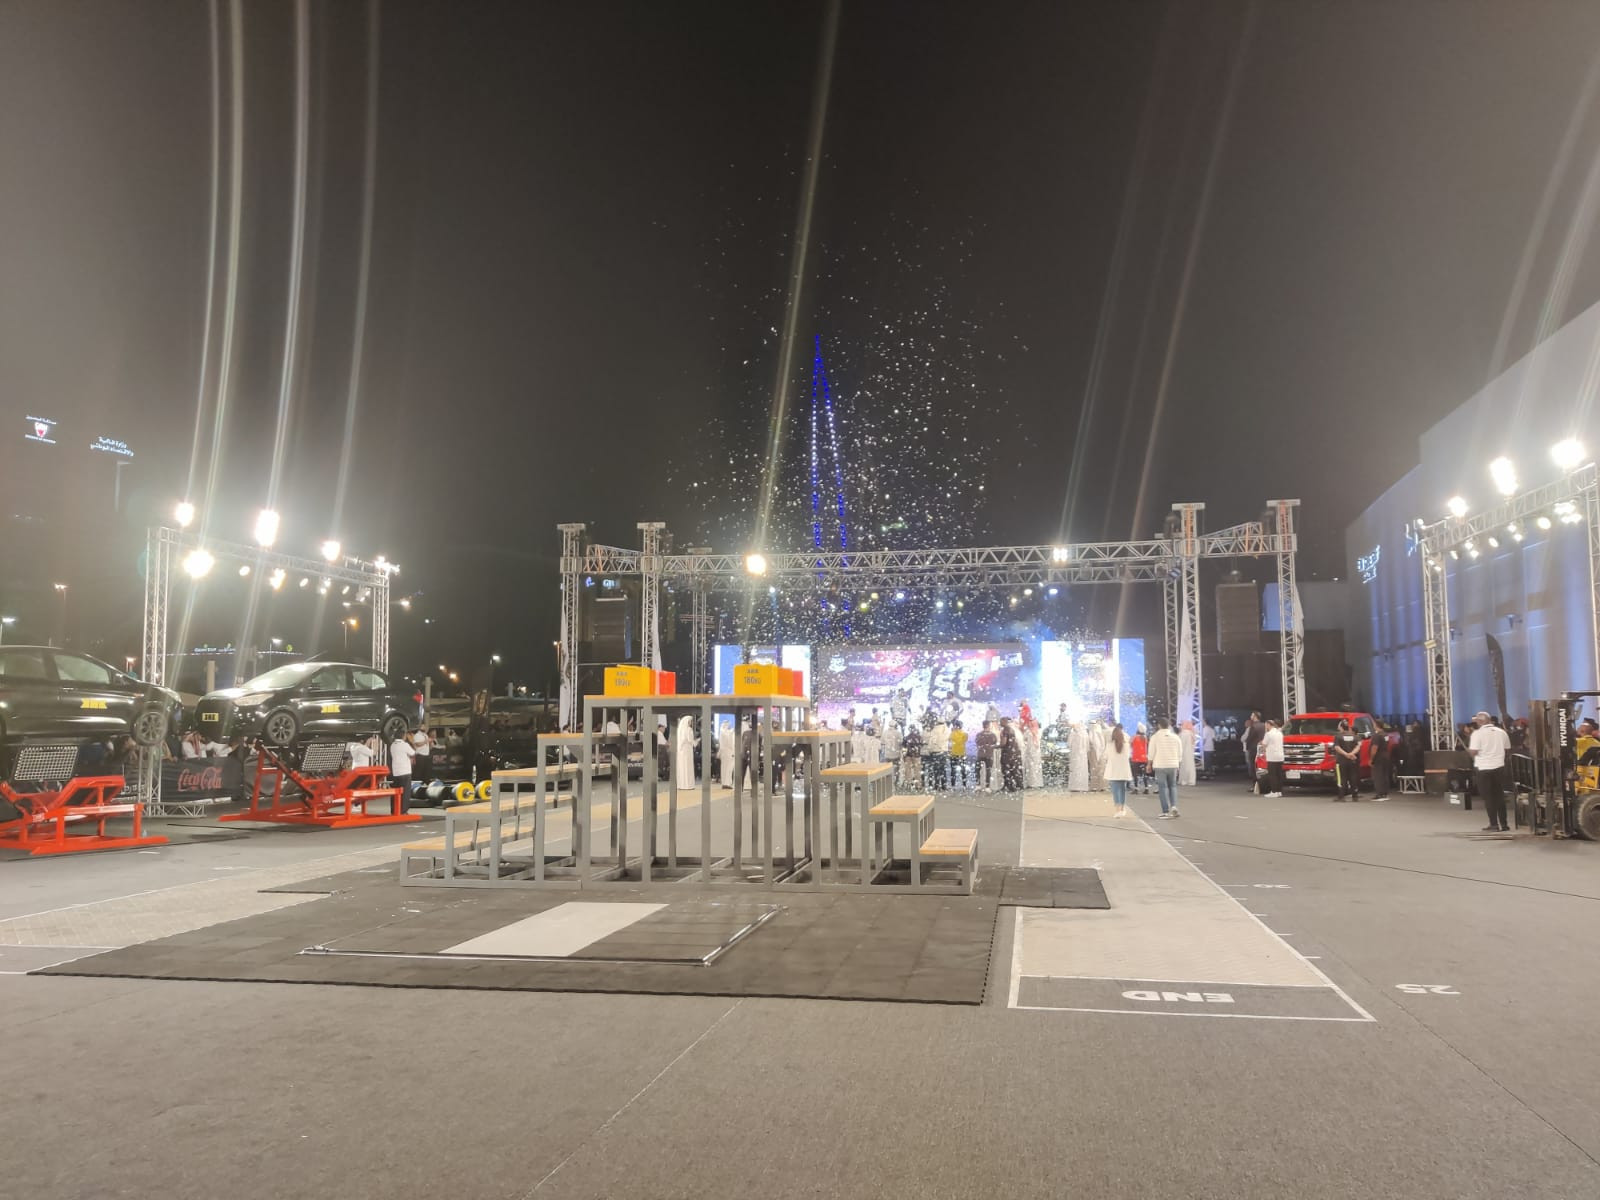 The Gulf Cooperation Council Strongest Man took place in a temporary pop up arena outside a shopping mall ©ITG